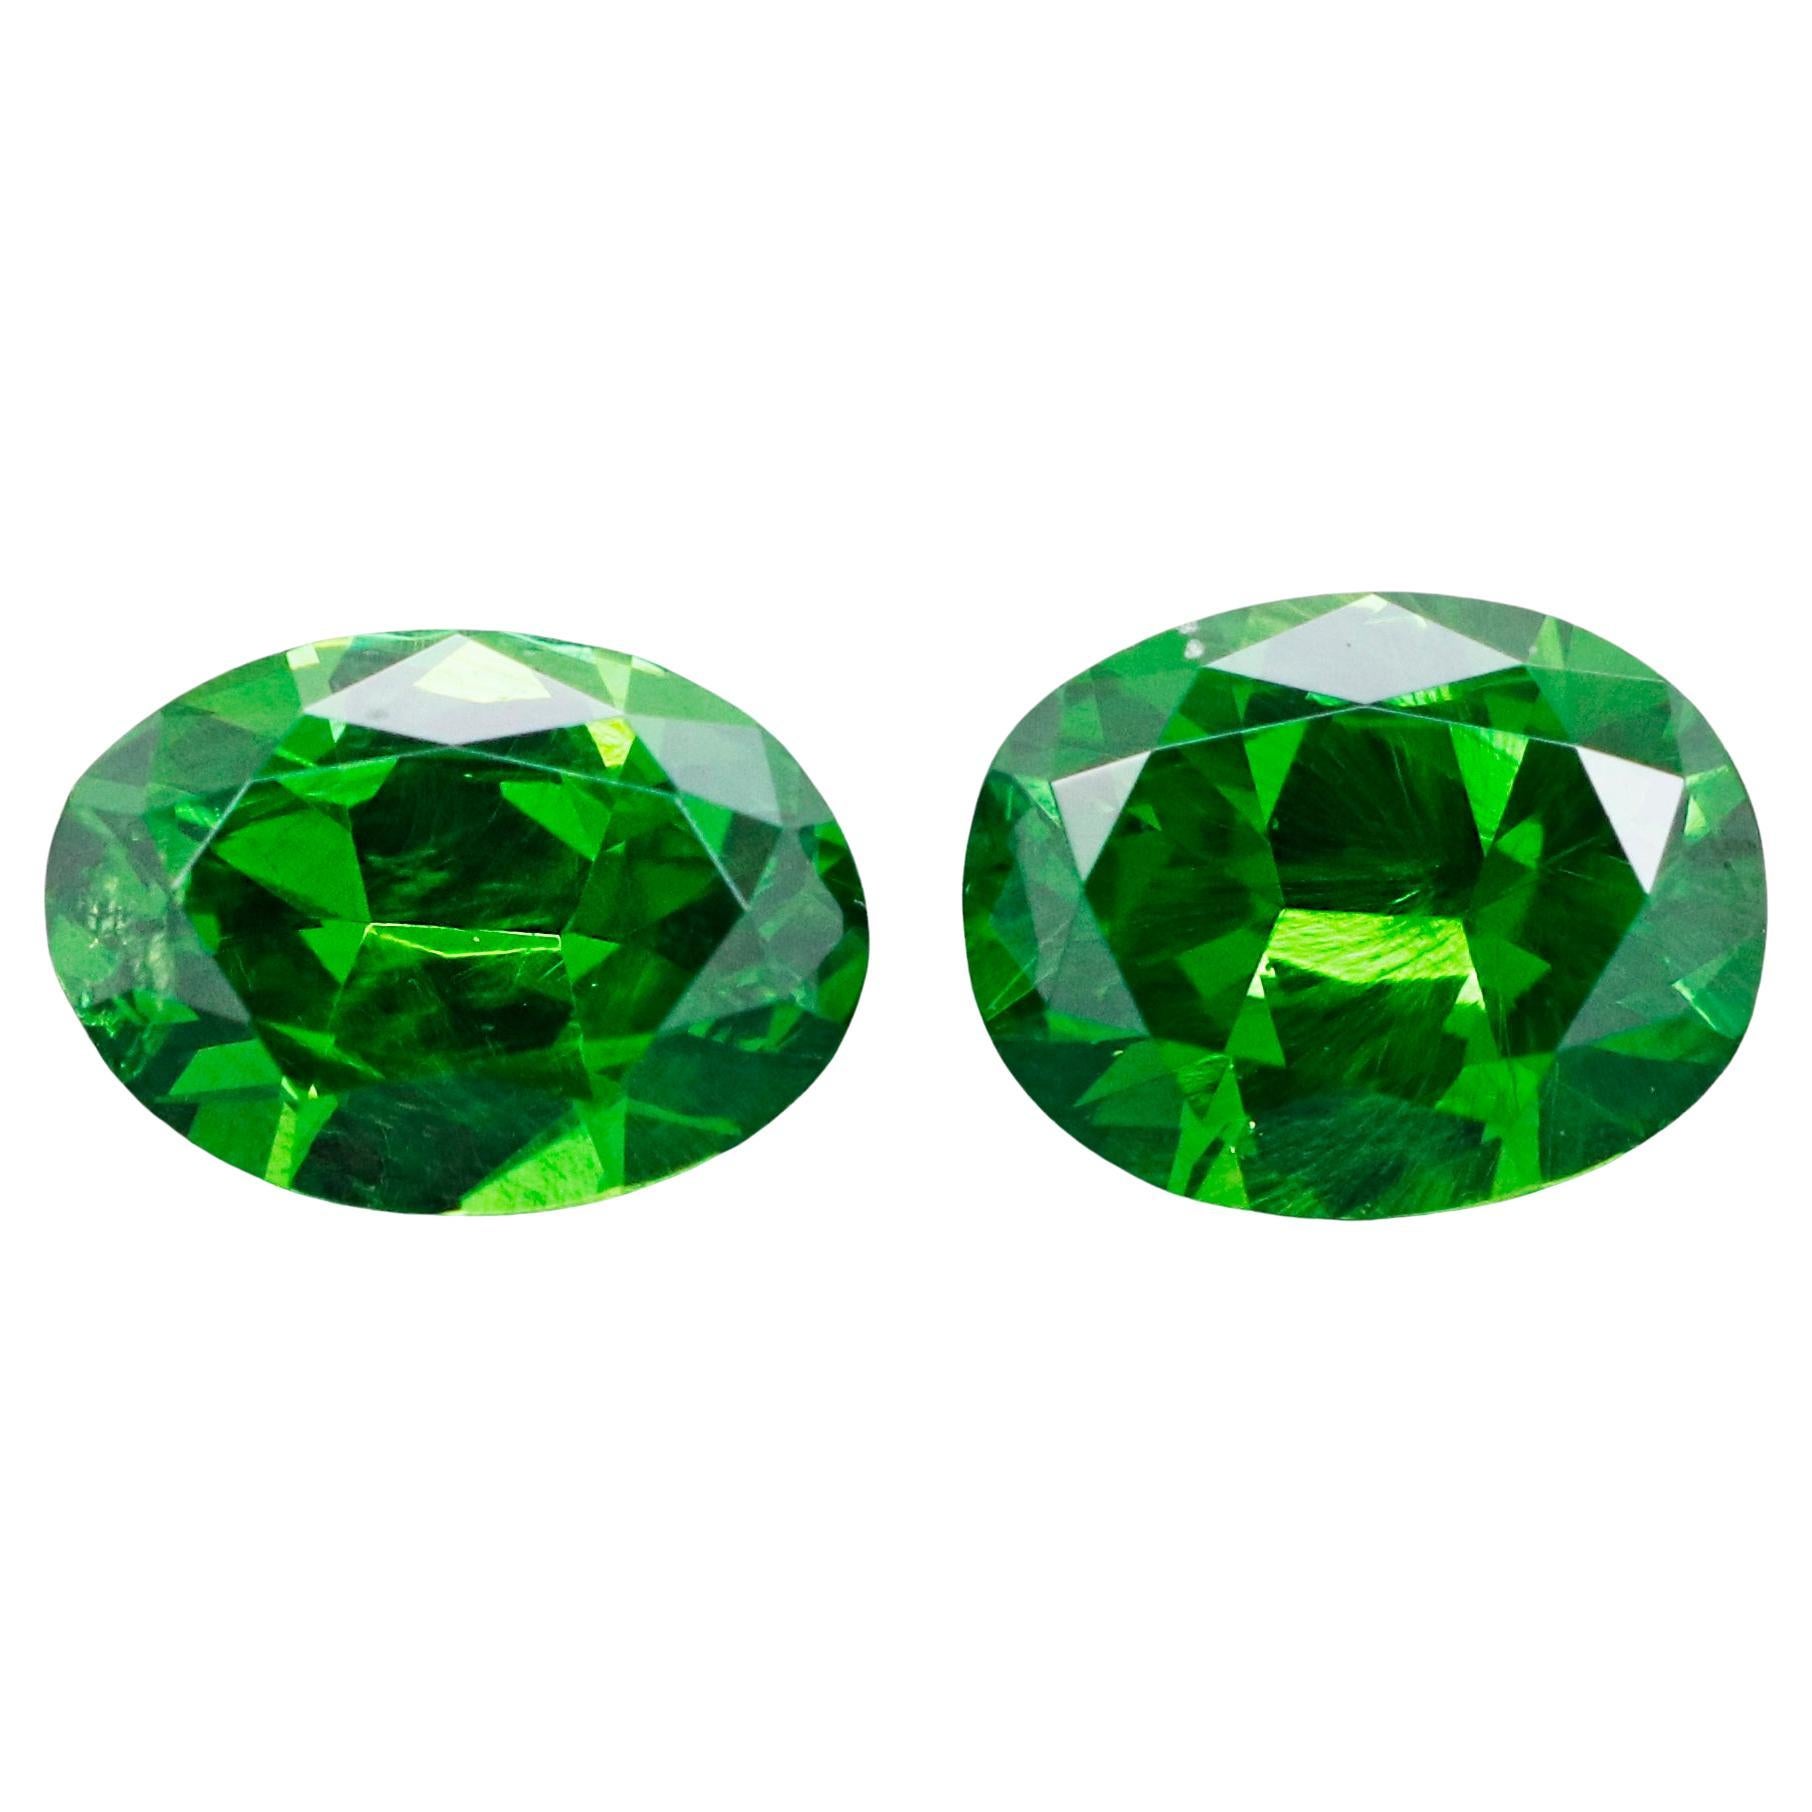 Pair of Russian Demantoid Garnets with horsetail inclusion 0.59 ct weight For Sale